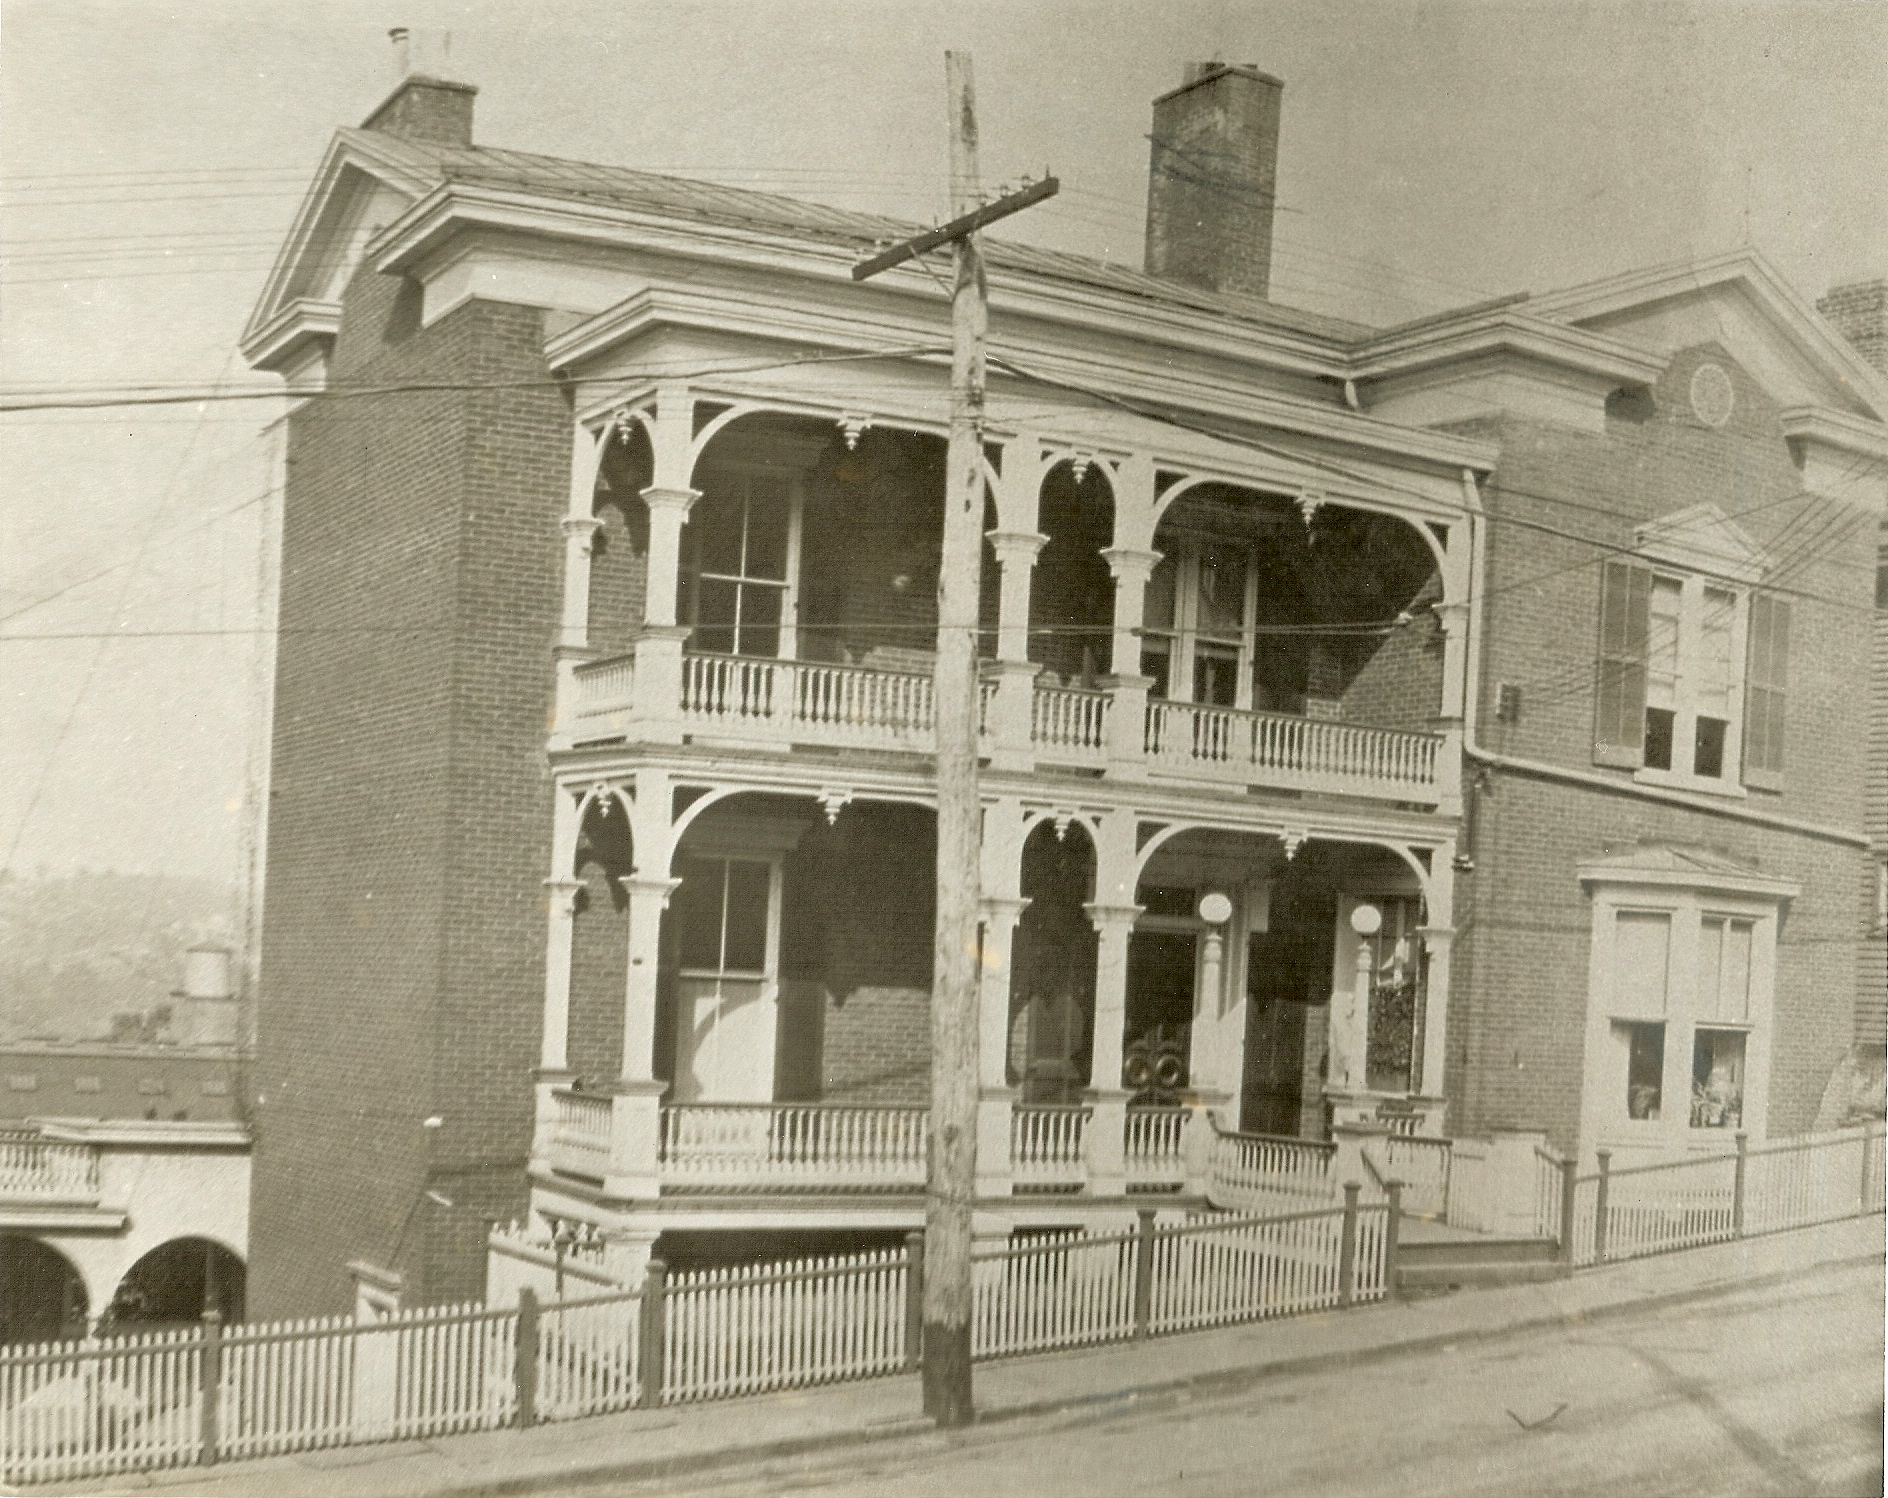 1301 Church St. Early to Mid 1900's